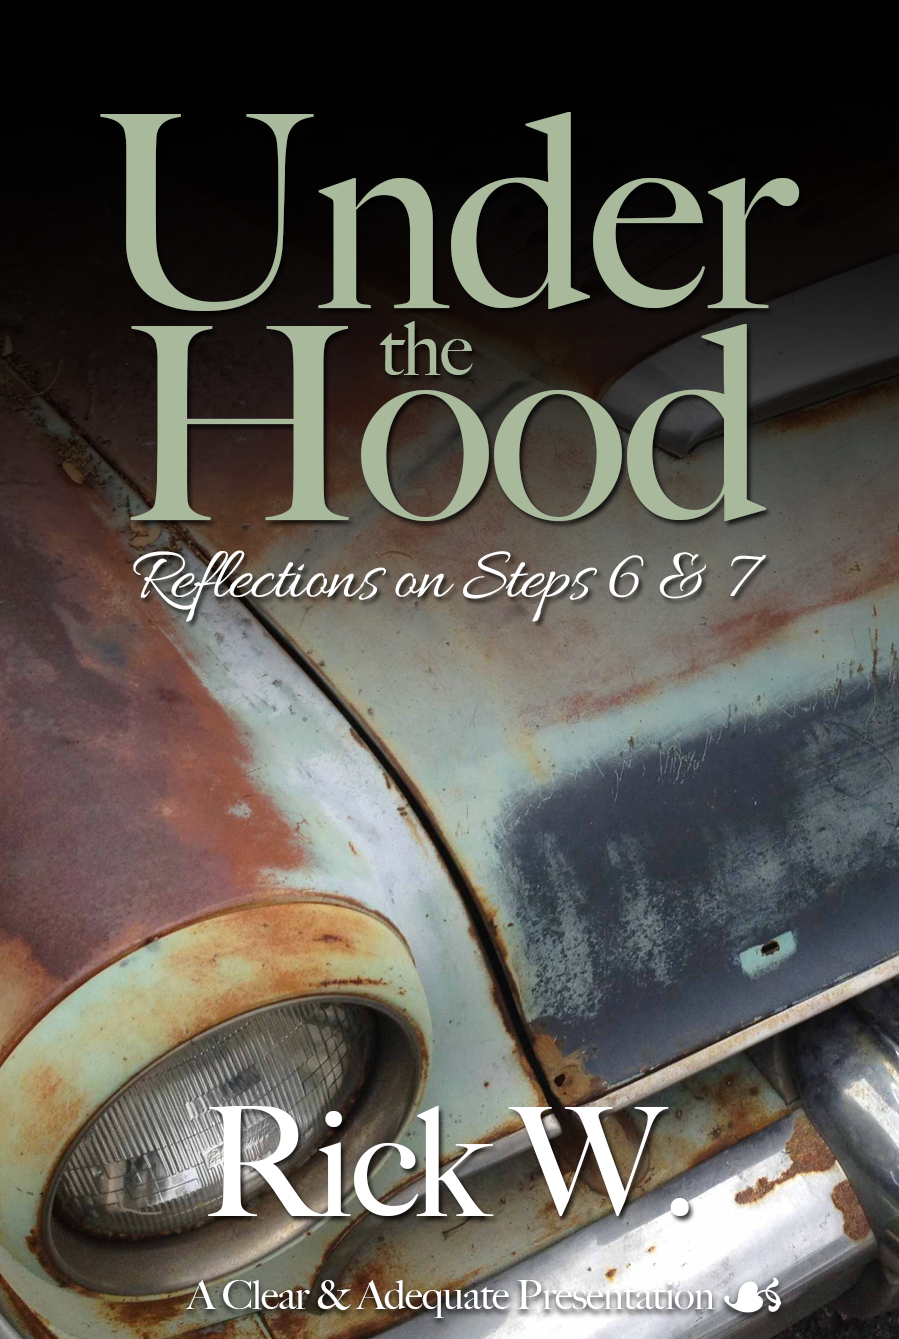 ANNOUNCING: New Book Launch – “Under The Hood”